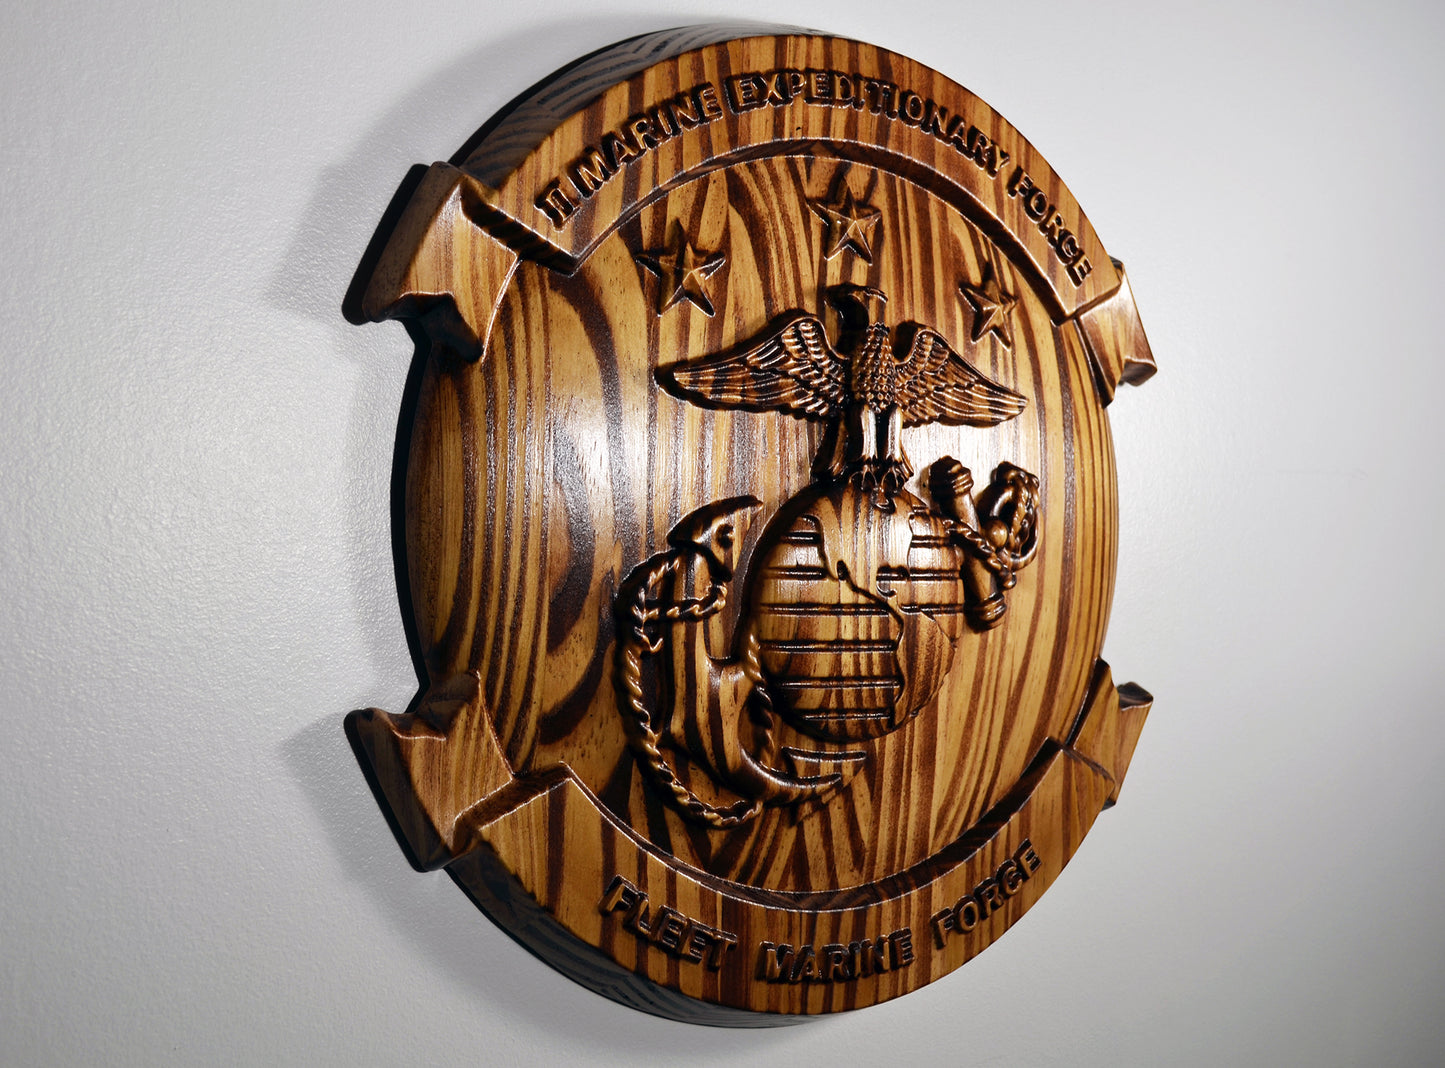 USMC II Marine Expeditionary Force, cnc, stained 3d wood carving, military plaque